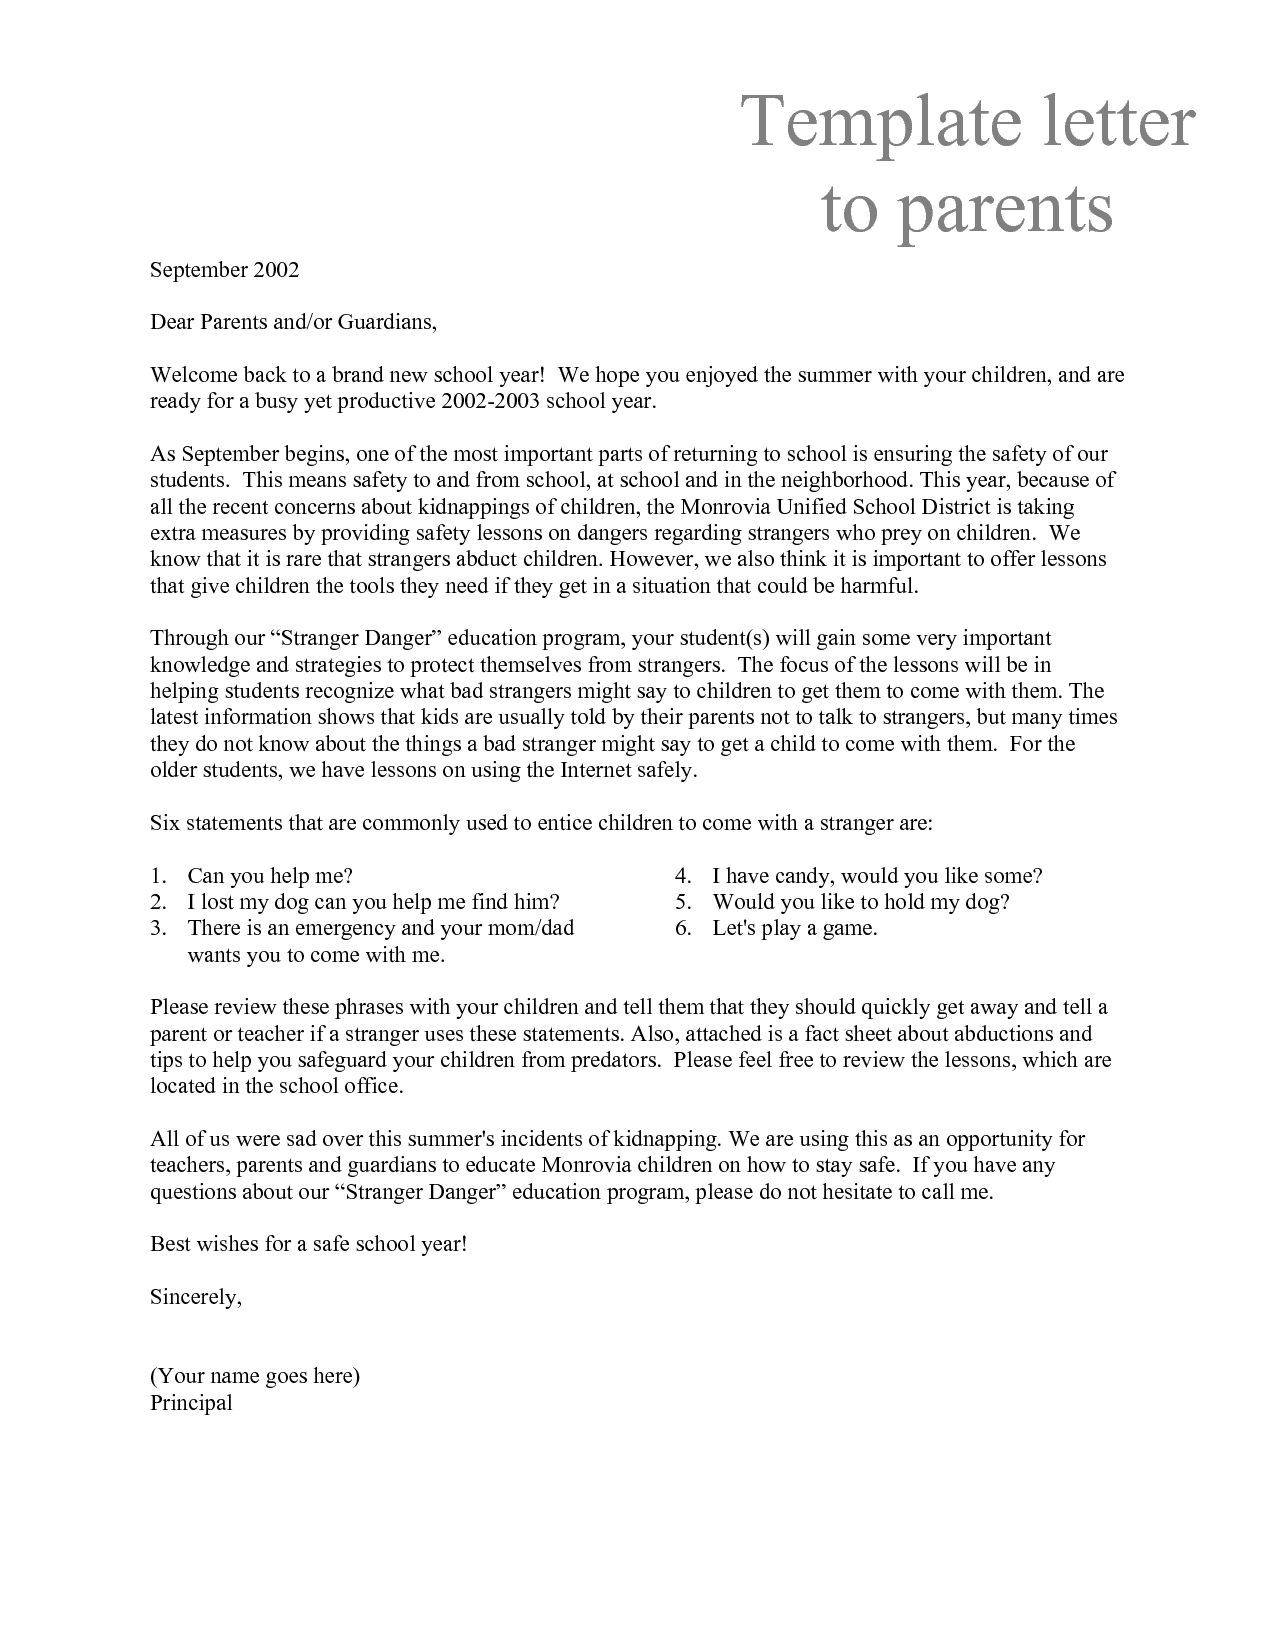 Example Of Teacher Letter Home To Parents Beginning One The Year in Letter To Parents Template From Teachers